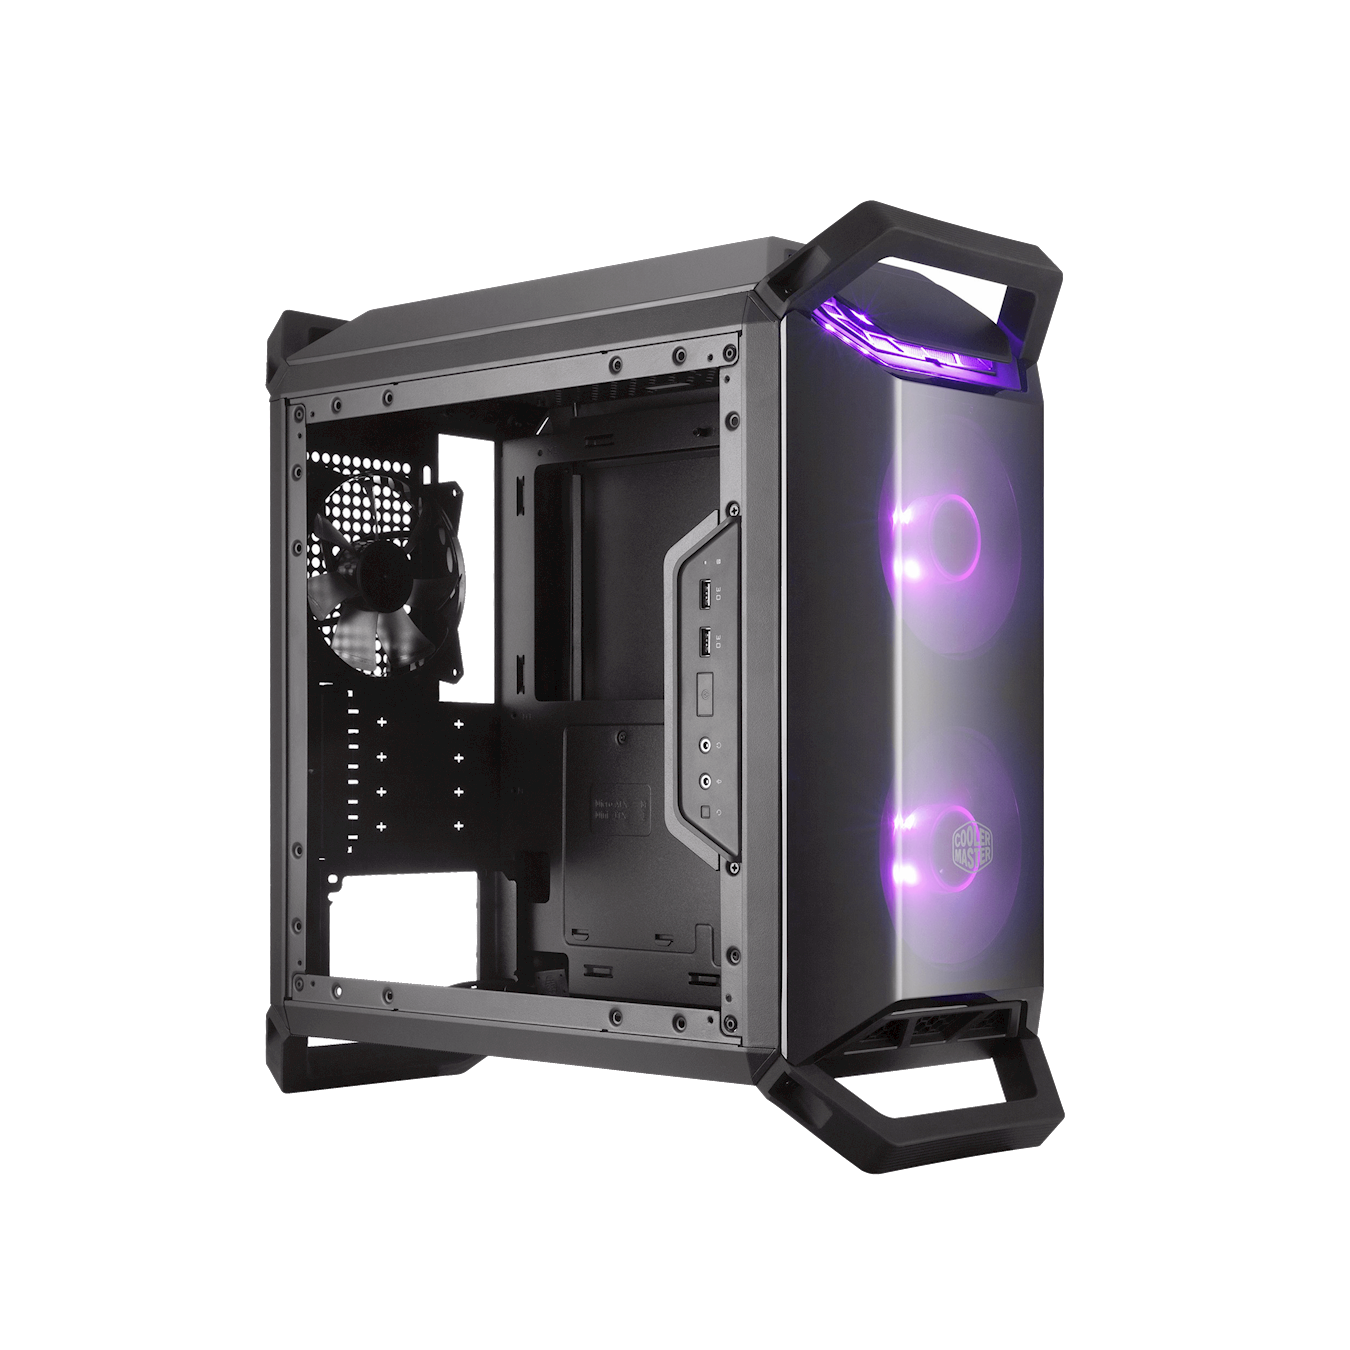 MasterBox Q300P Mini Tower Case - One RGB controller is included in the accessory pack. If your MB does not support the RGB control function, you can connect the RESET button cable and control the RGB lighting directly from the I/O panel.